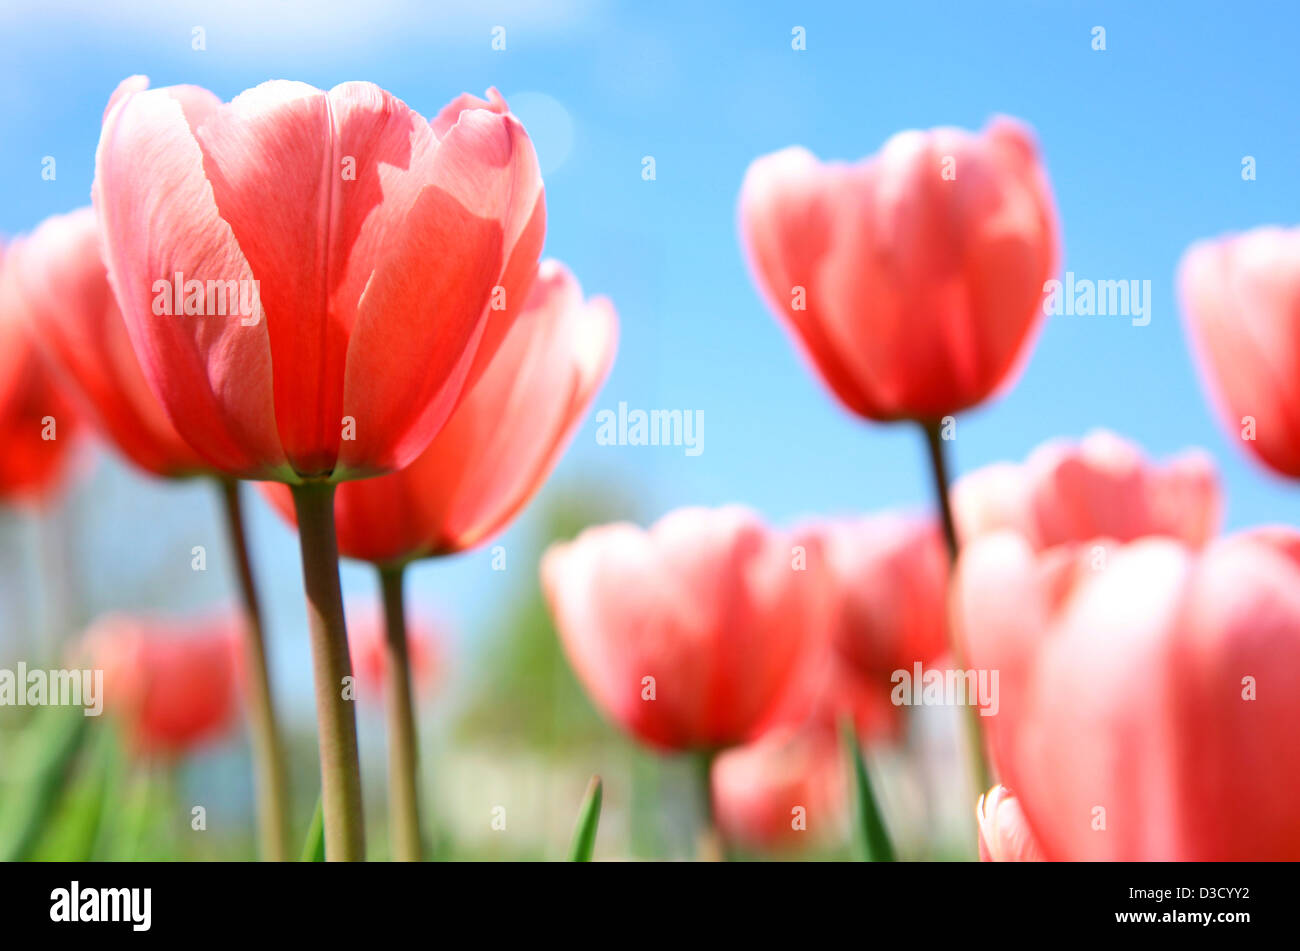 Pink spring tulips against blue sky Stock Photo